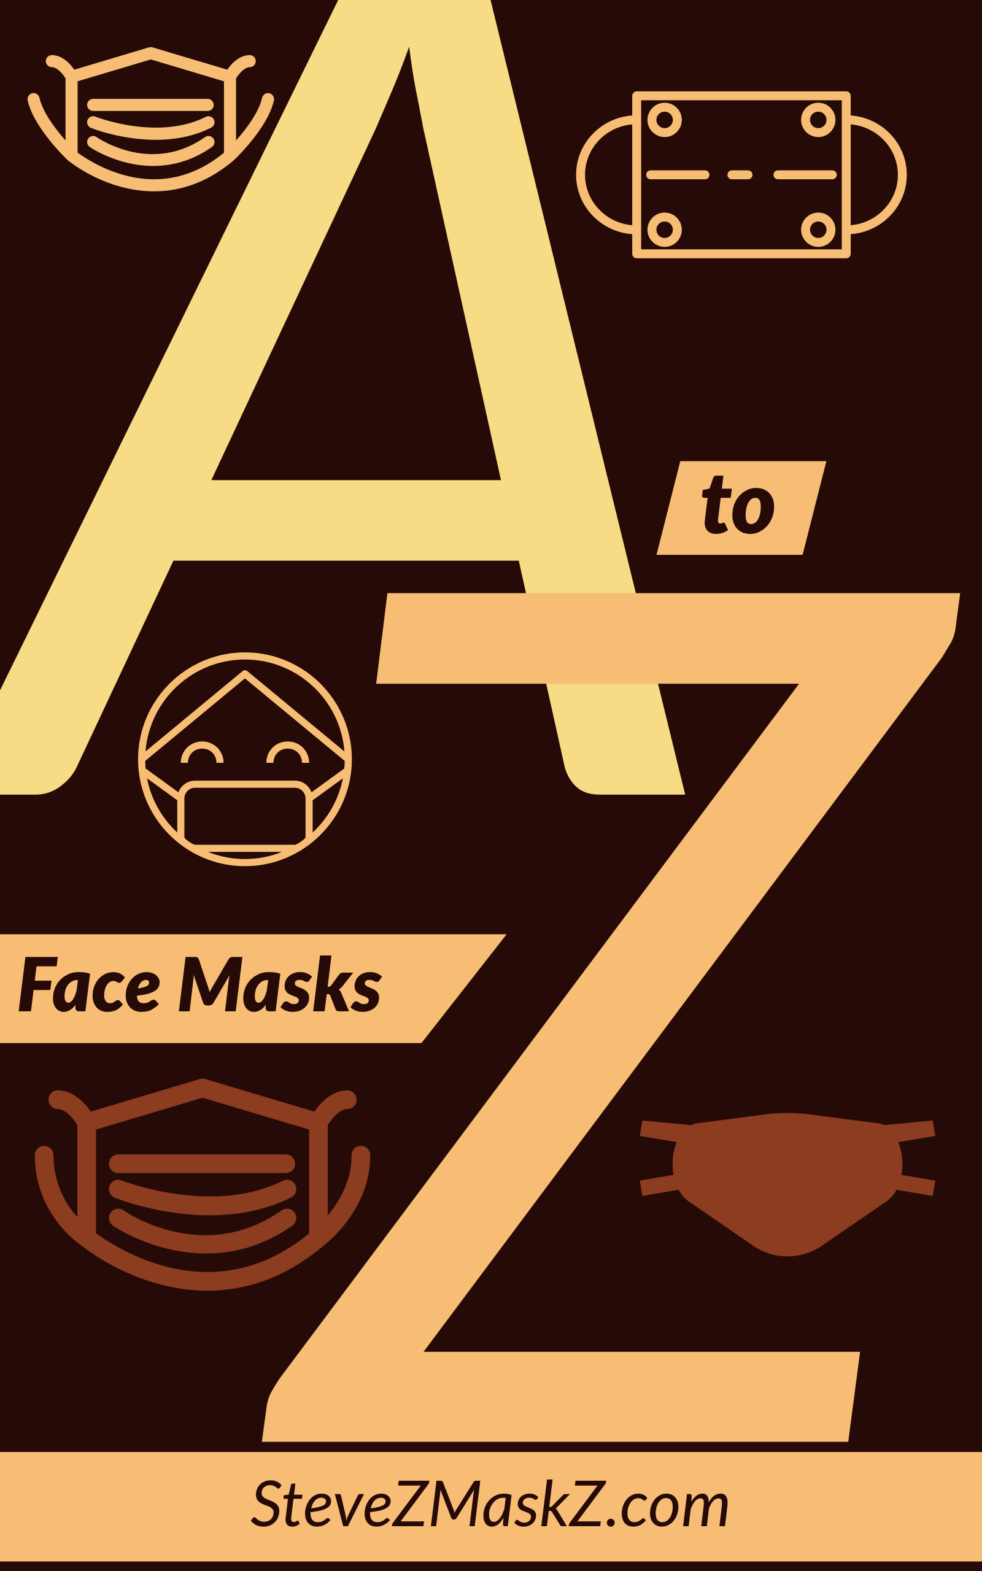 The A-Z of Face Masks - this is a list of things form A to Z about Face Masks.